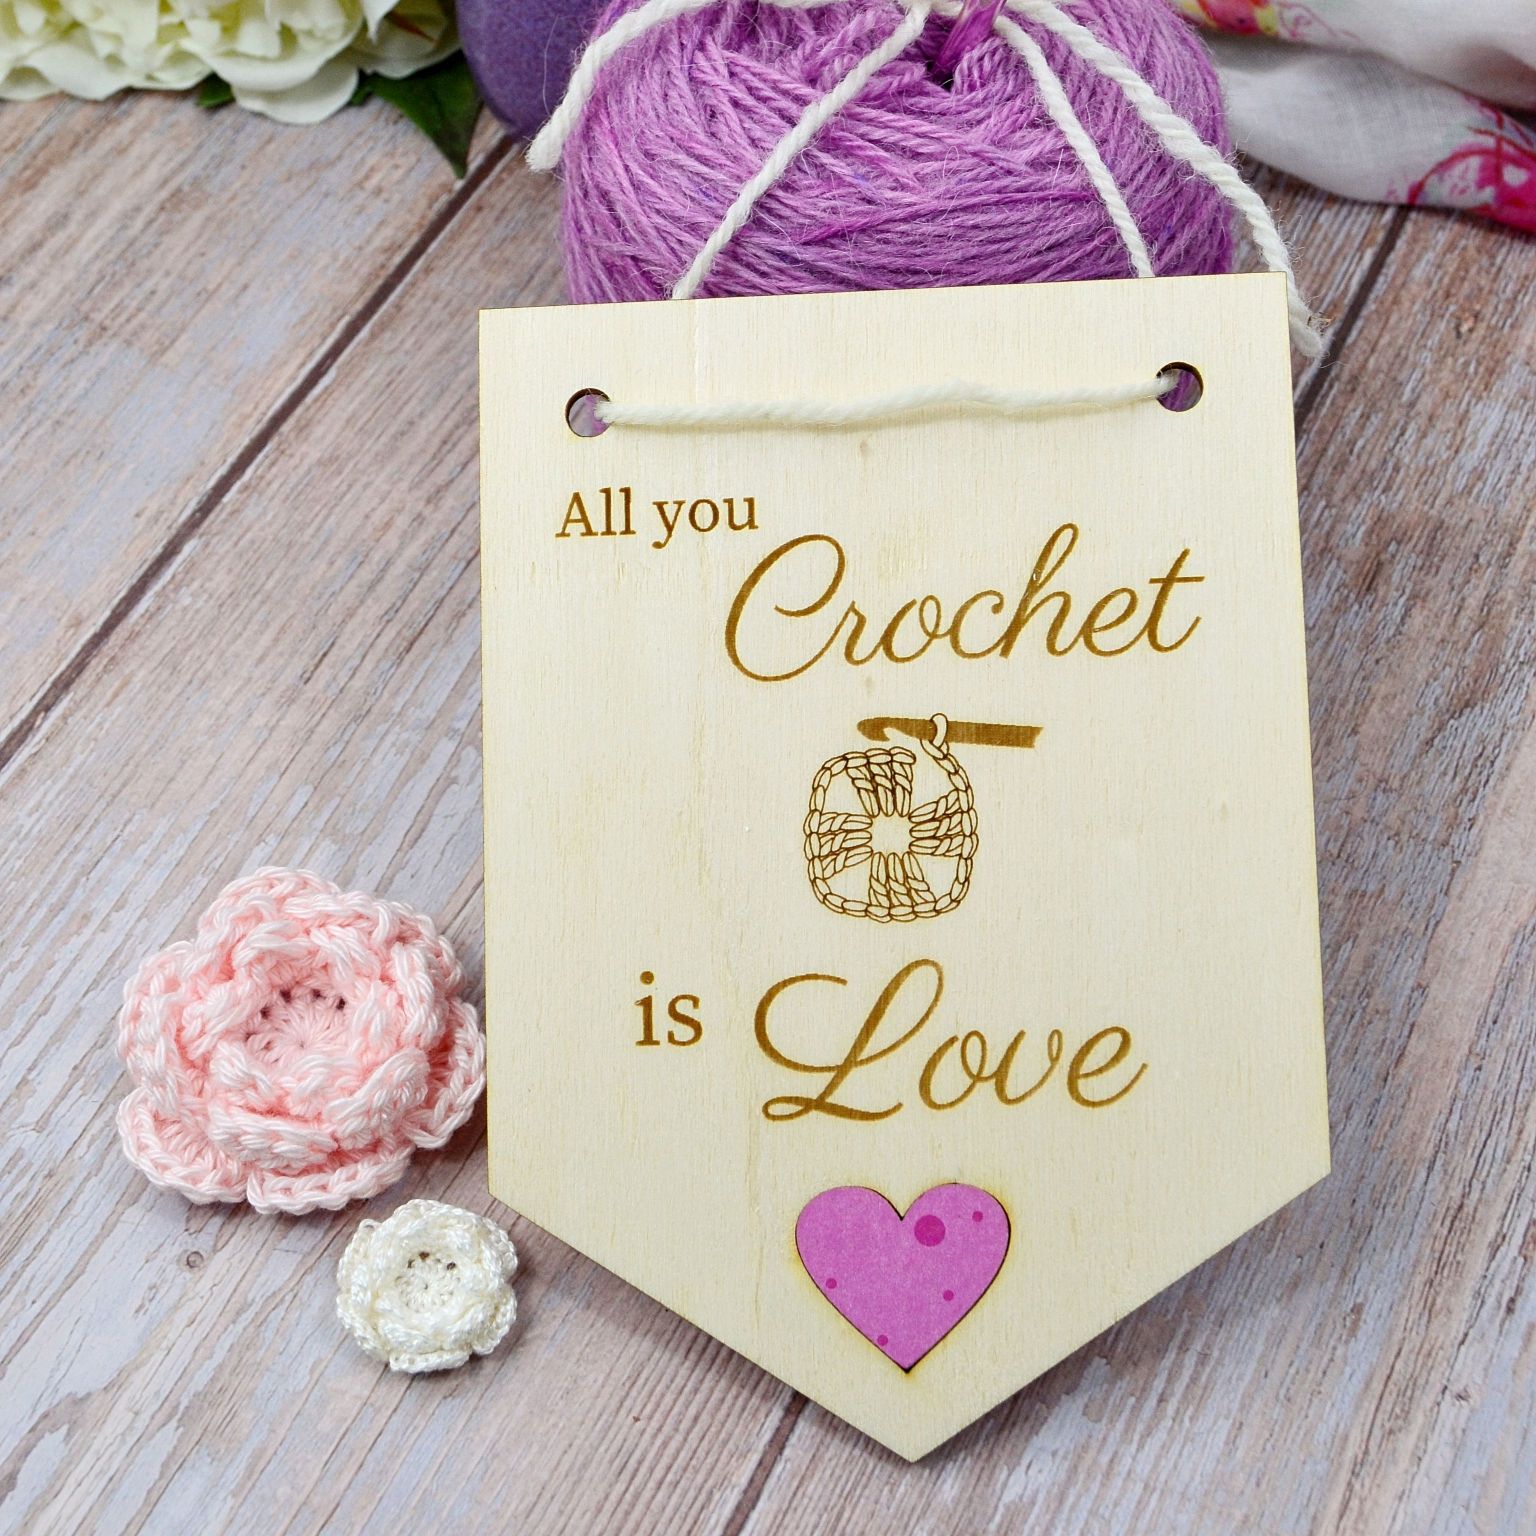 Holzwimpel "All you crochet is love" - Wooden Pennant